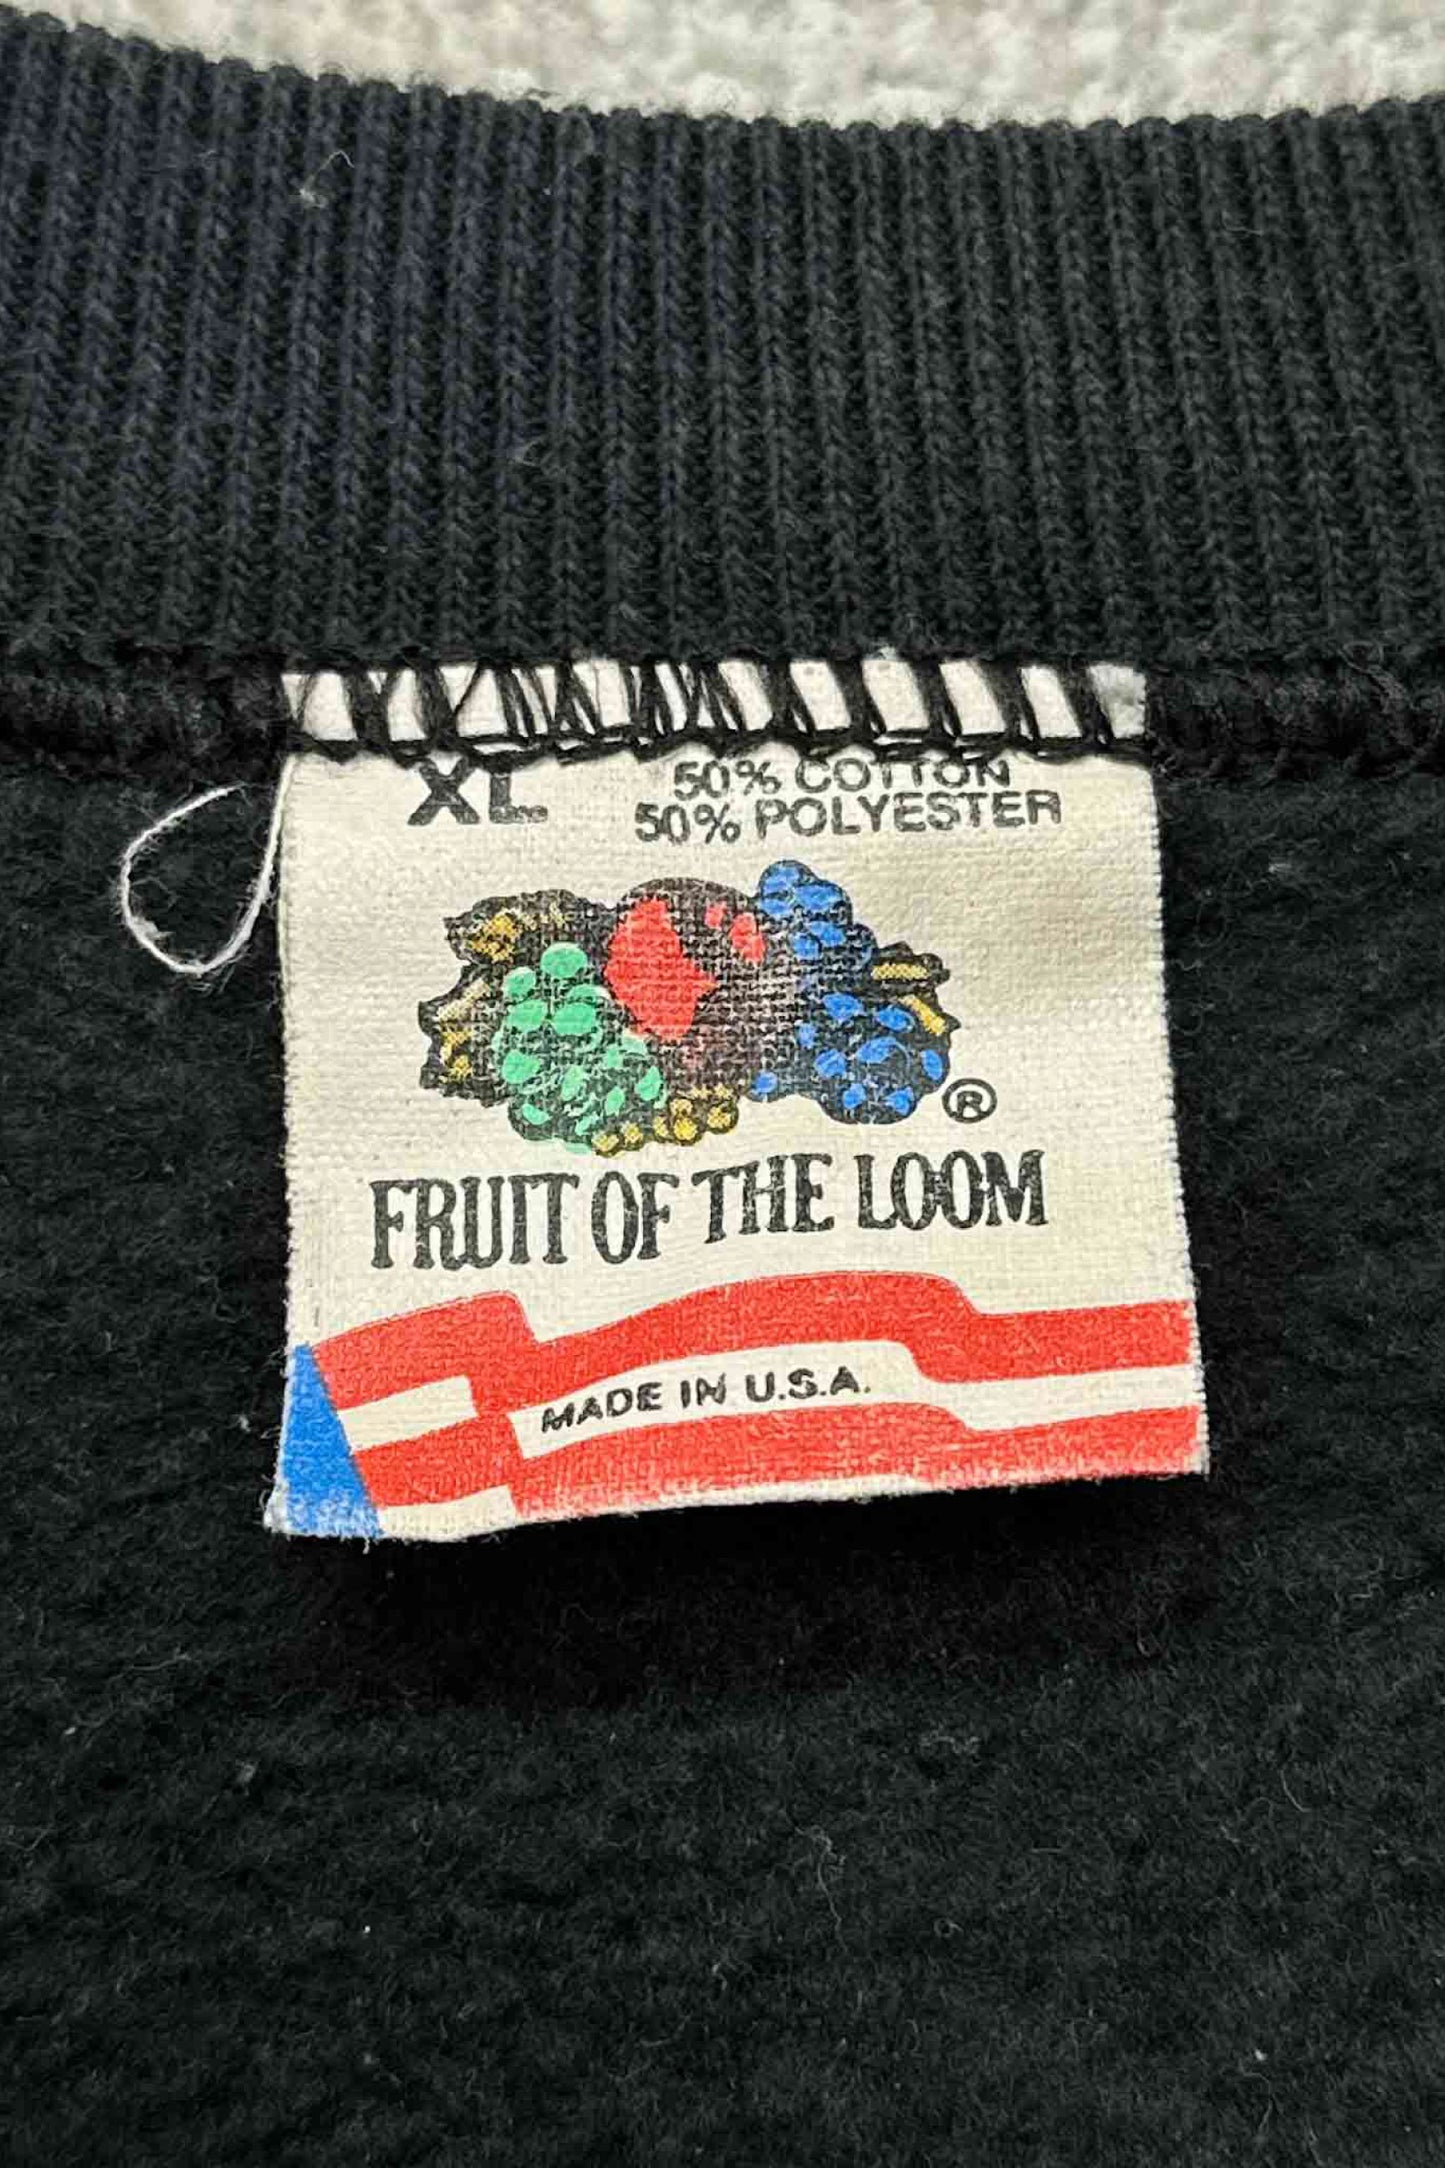 Made in USA FRUIT OF THE LOOM black sweat